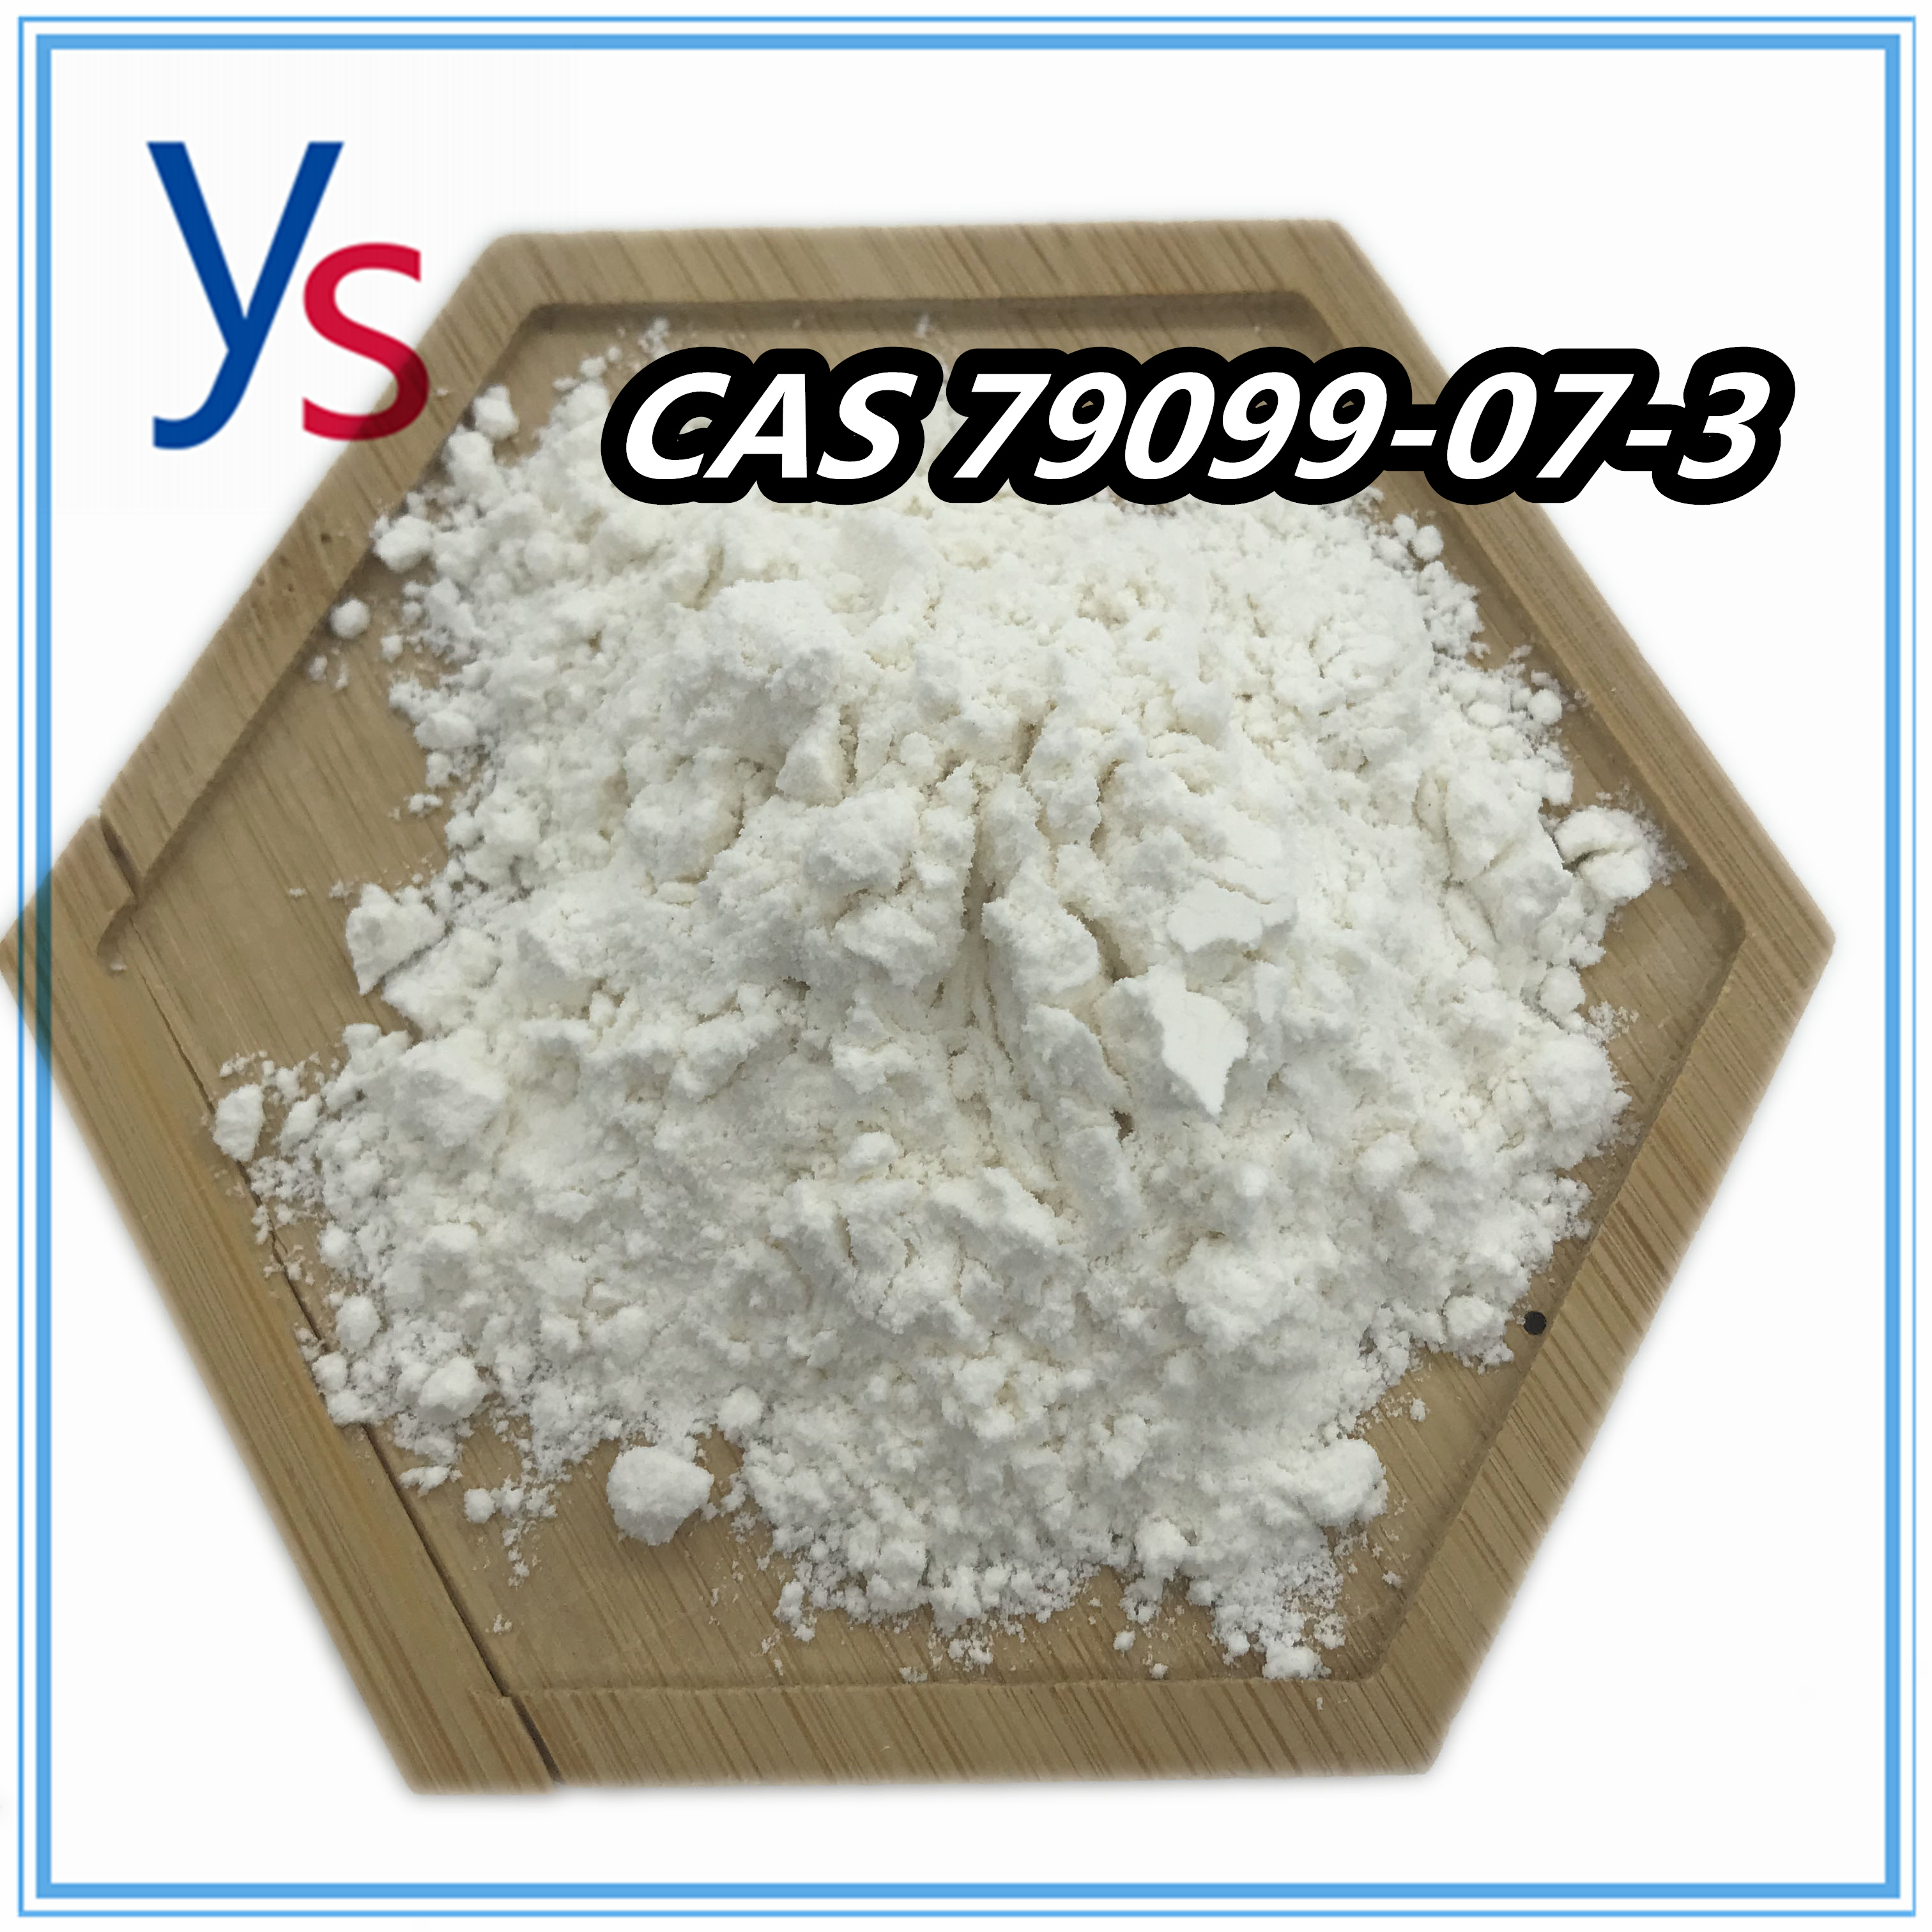  CAS 79099-07-3 Pharmaceutical Chemical With Hihg Purity 